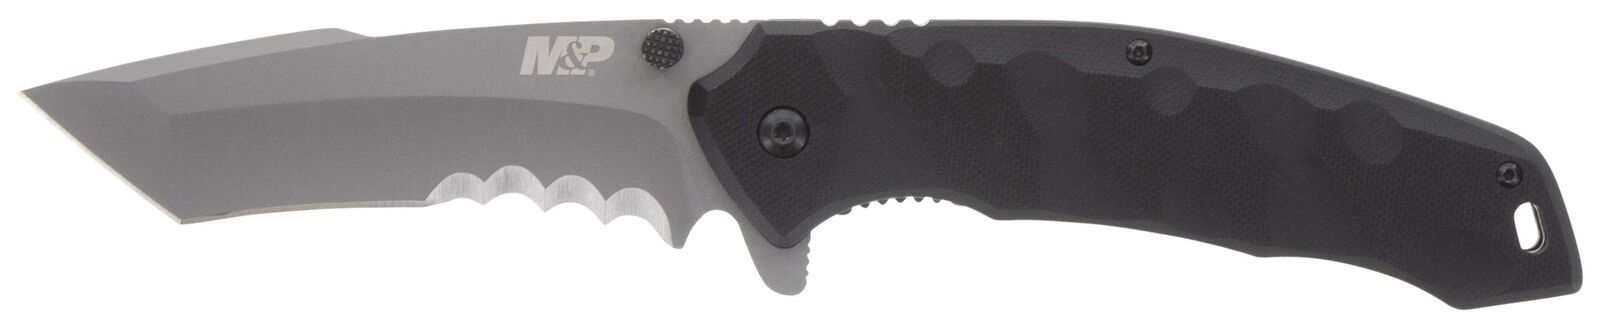 Smith & Wesson M&P Special Ops 9.3in Stainless Steel Assisted Opening Knife with